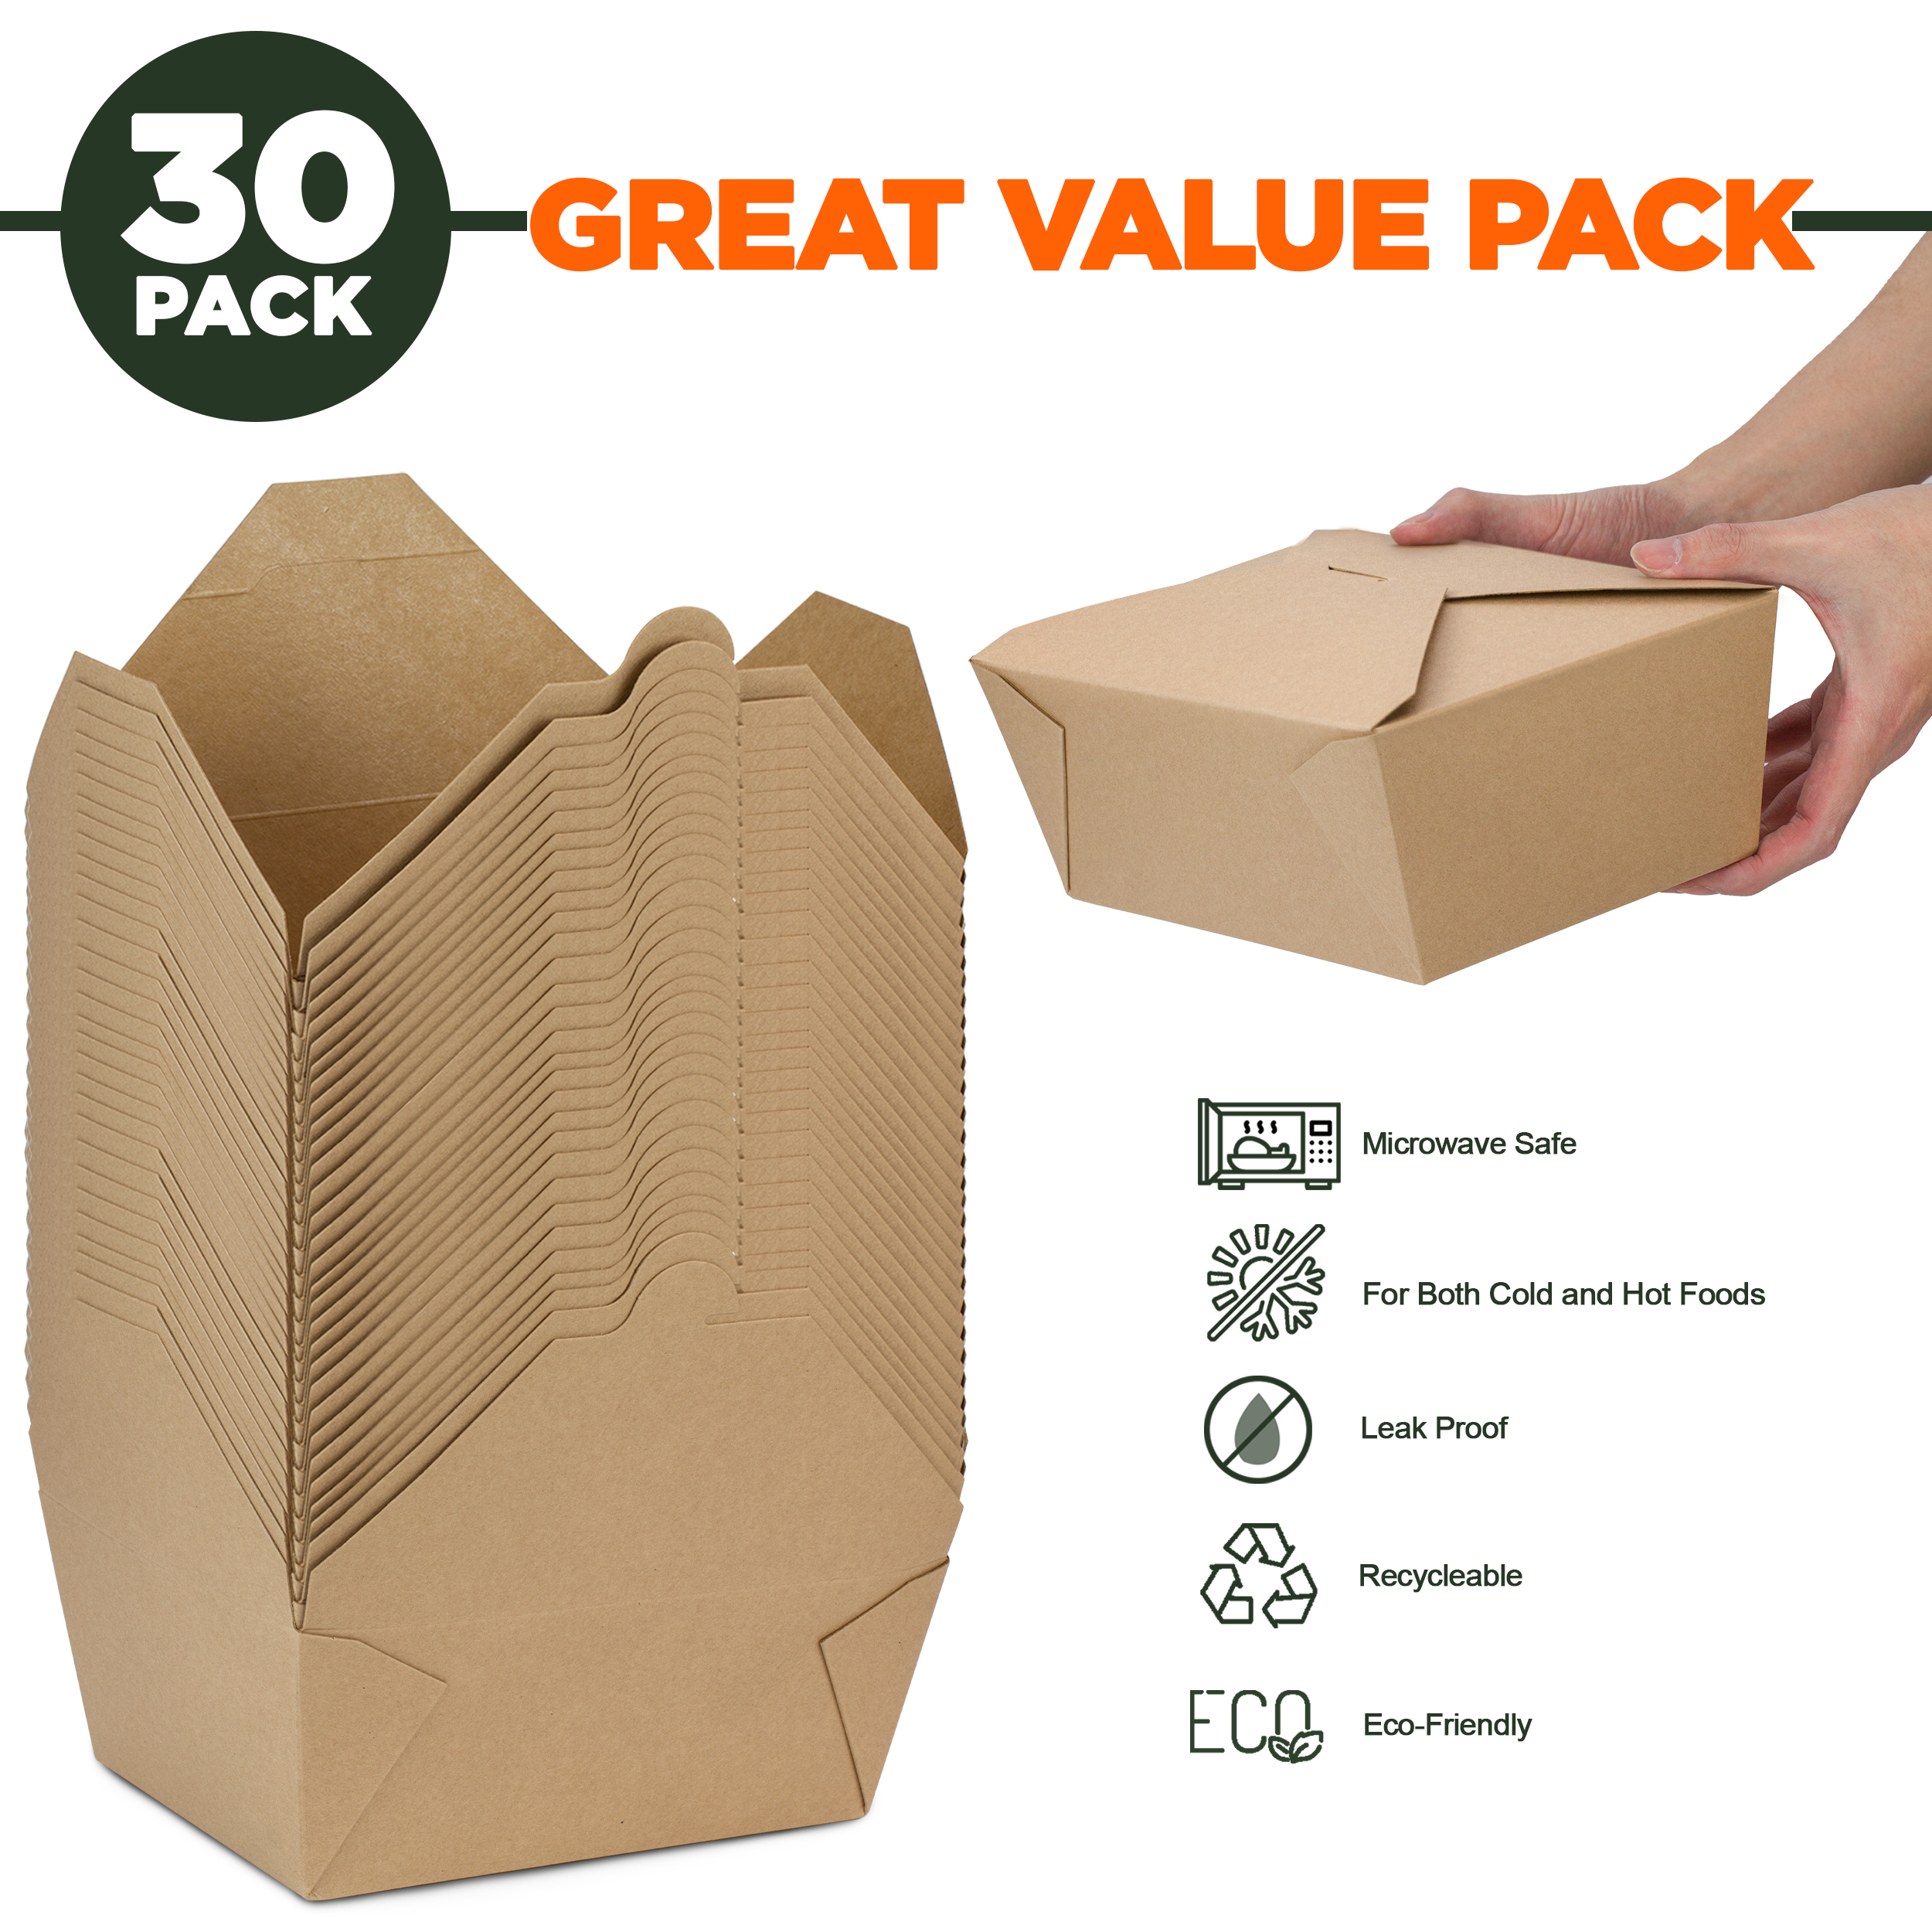 [160 Pack] 112 oz Paper Take Out Containers 8.8 x 6.5 x 3.5 inch - White Lunch Meal Food Boxes #4, Disposable Storage to Go Packaging, Microwave Safe